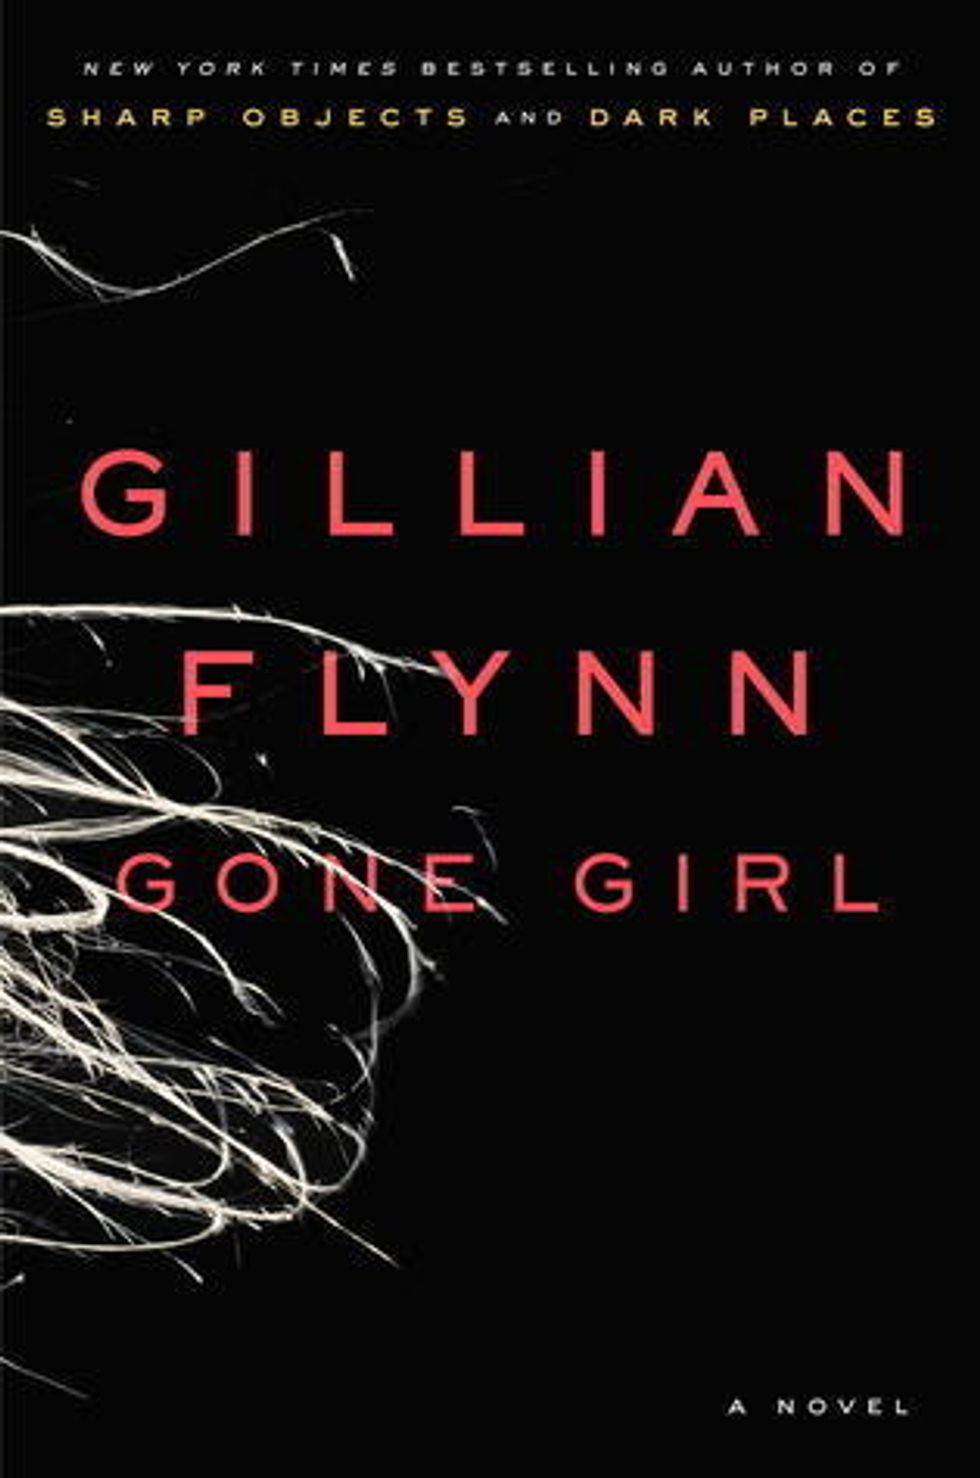 Why “Gone Girl” Is One Of The Best Books Ever Written